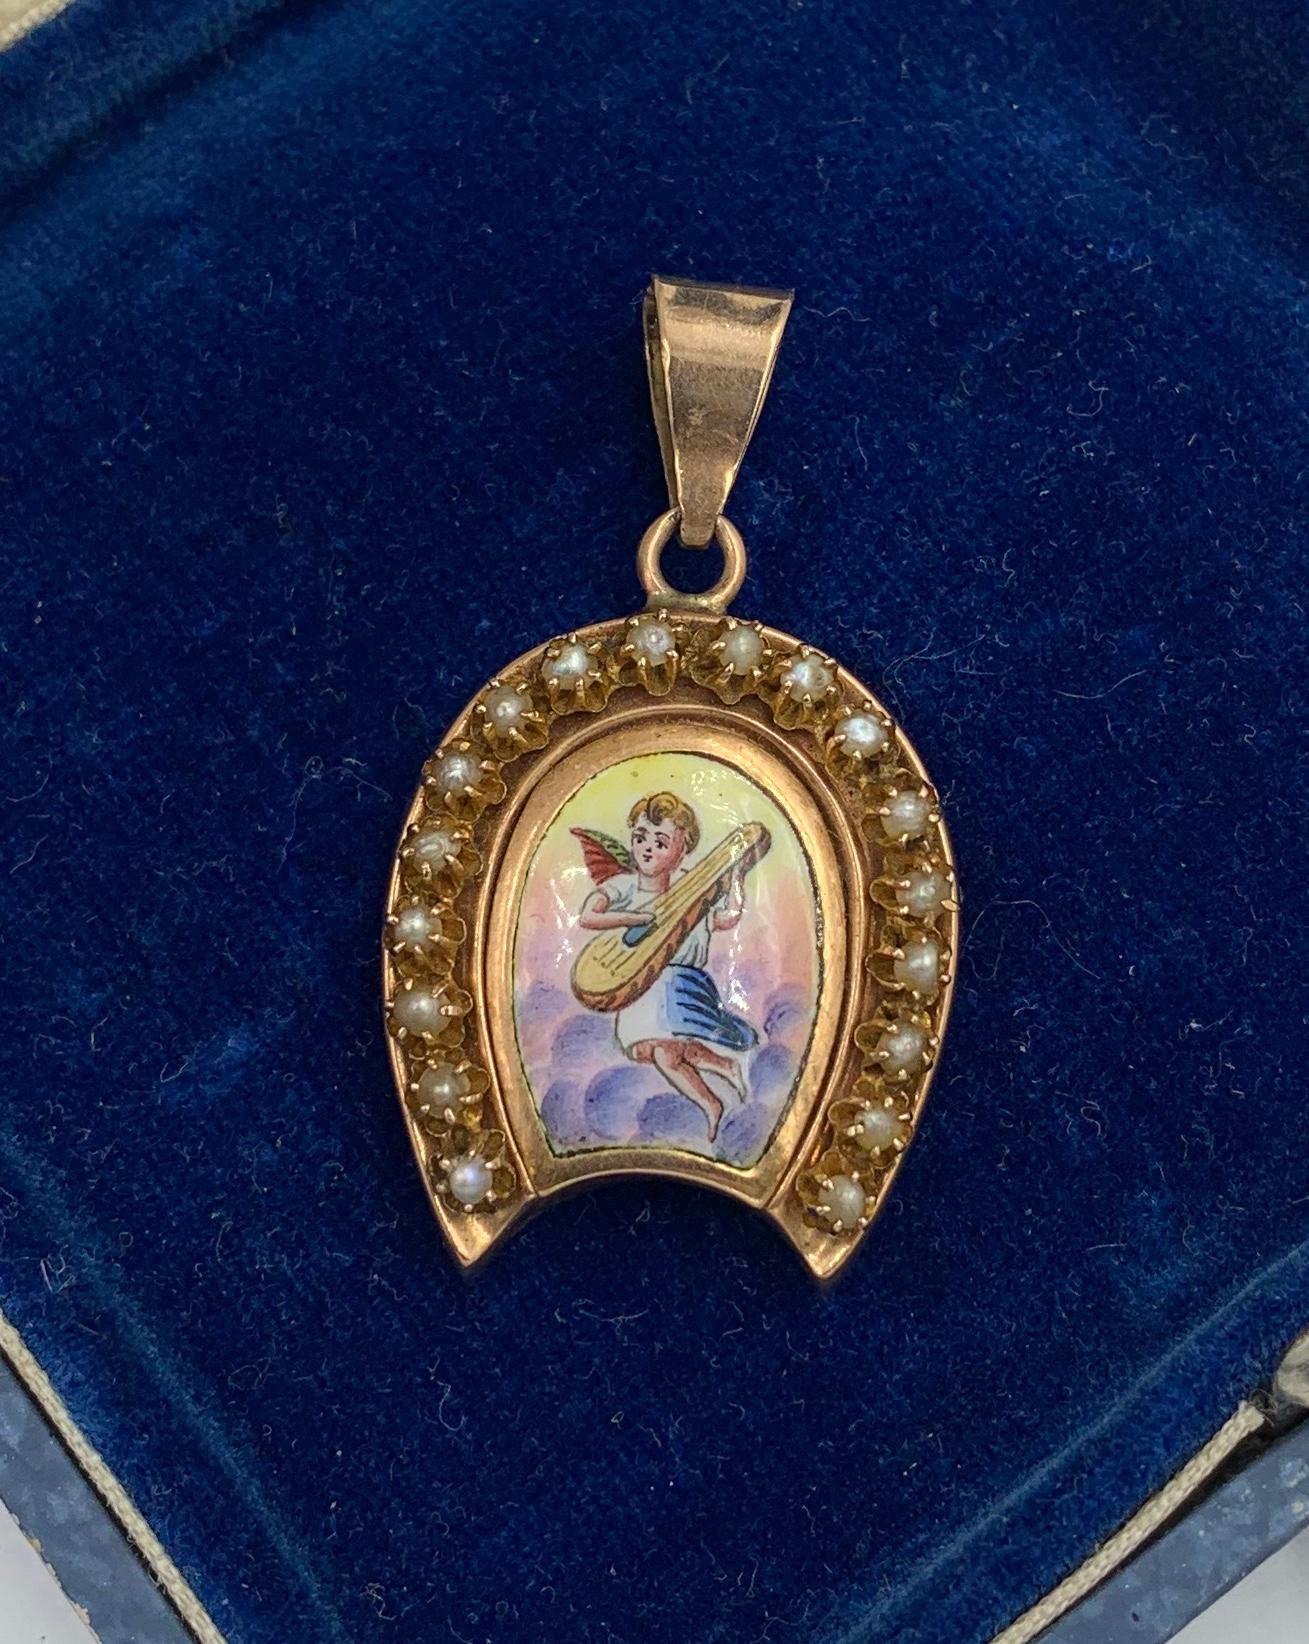 A rare and wonderful Victorian locket pendant with an image of a Winged Cherub or Angel in the sky with clouds below and playing a lute or lyre.  The romantic and charming image is done in enamel with gorgeous colors and details.  The Horseshoe